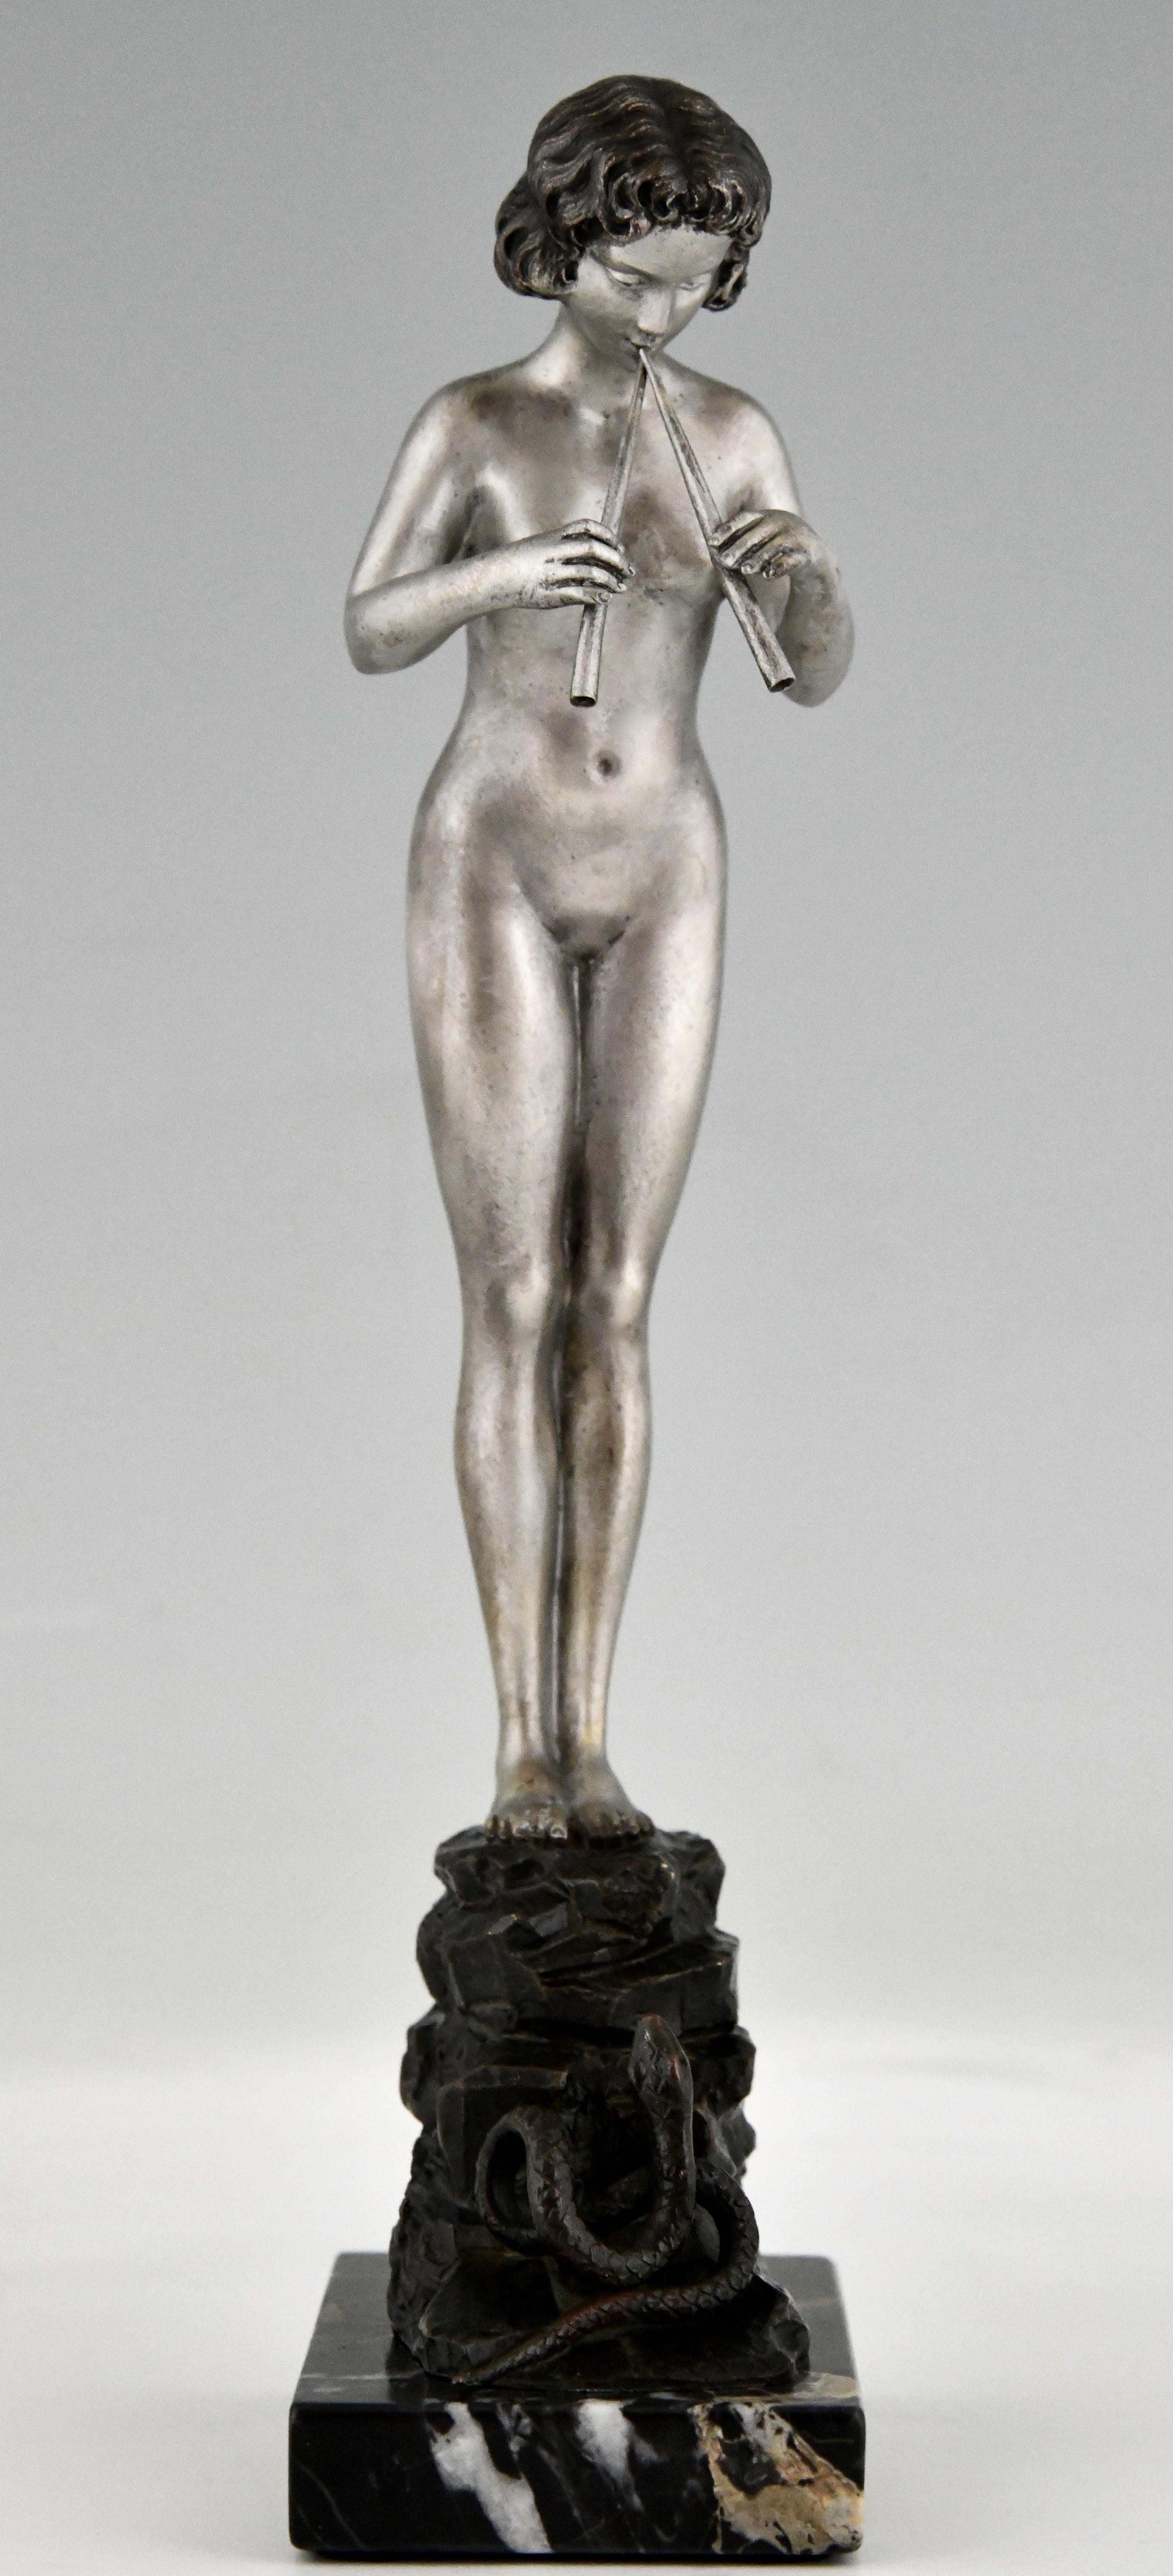 Art Nouveau bronze sculpture nude snake charmer, Germany ca. 1900. 
Bronze sculpture with silver and brown patina on a Portor marble base. 
This bronze is illustrated in:
Bronzes, sculptors and founders by H. Berman, Abage.